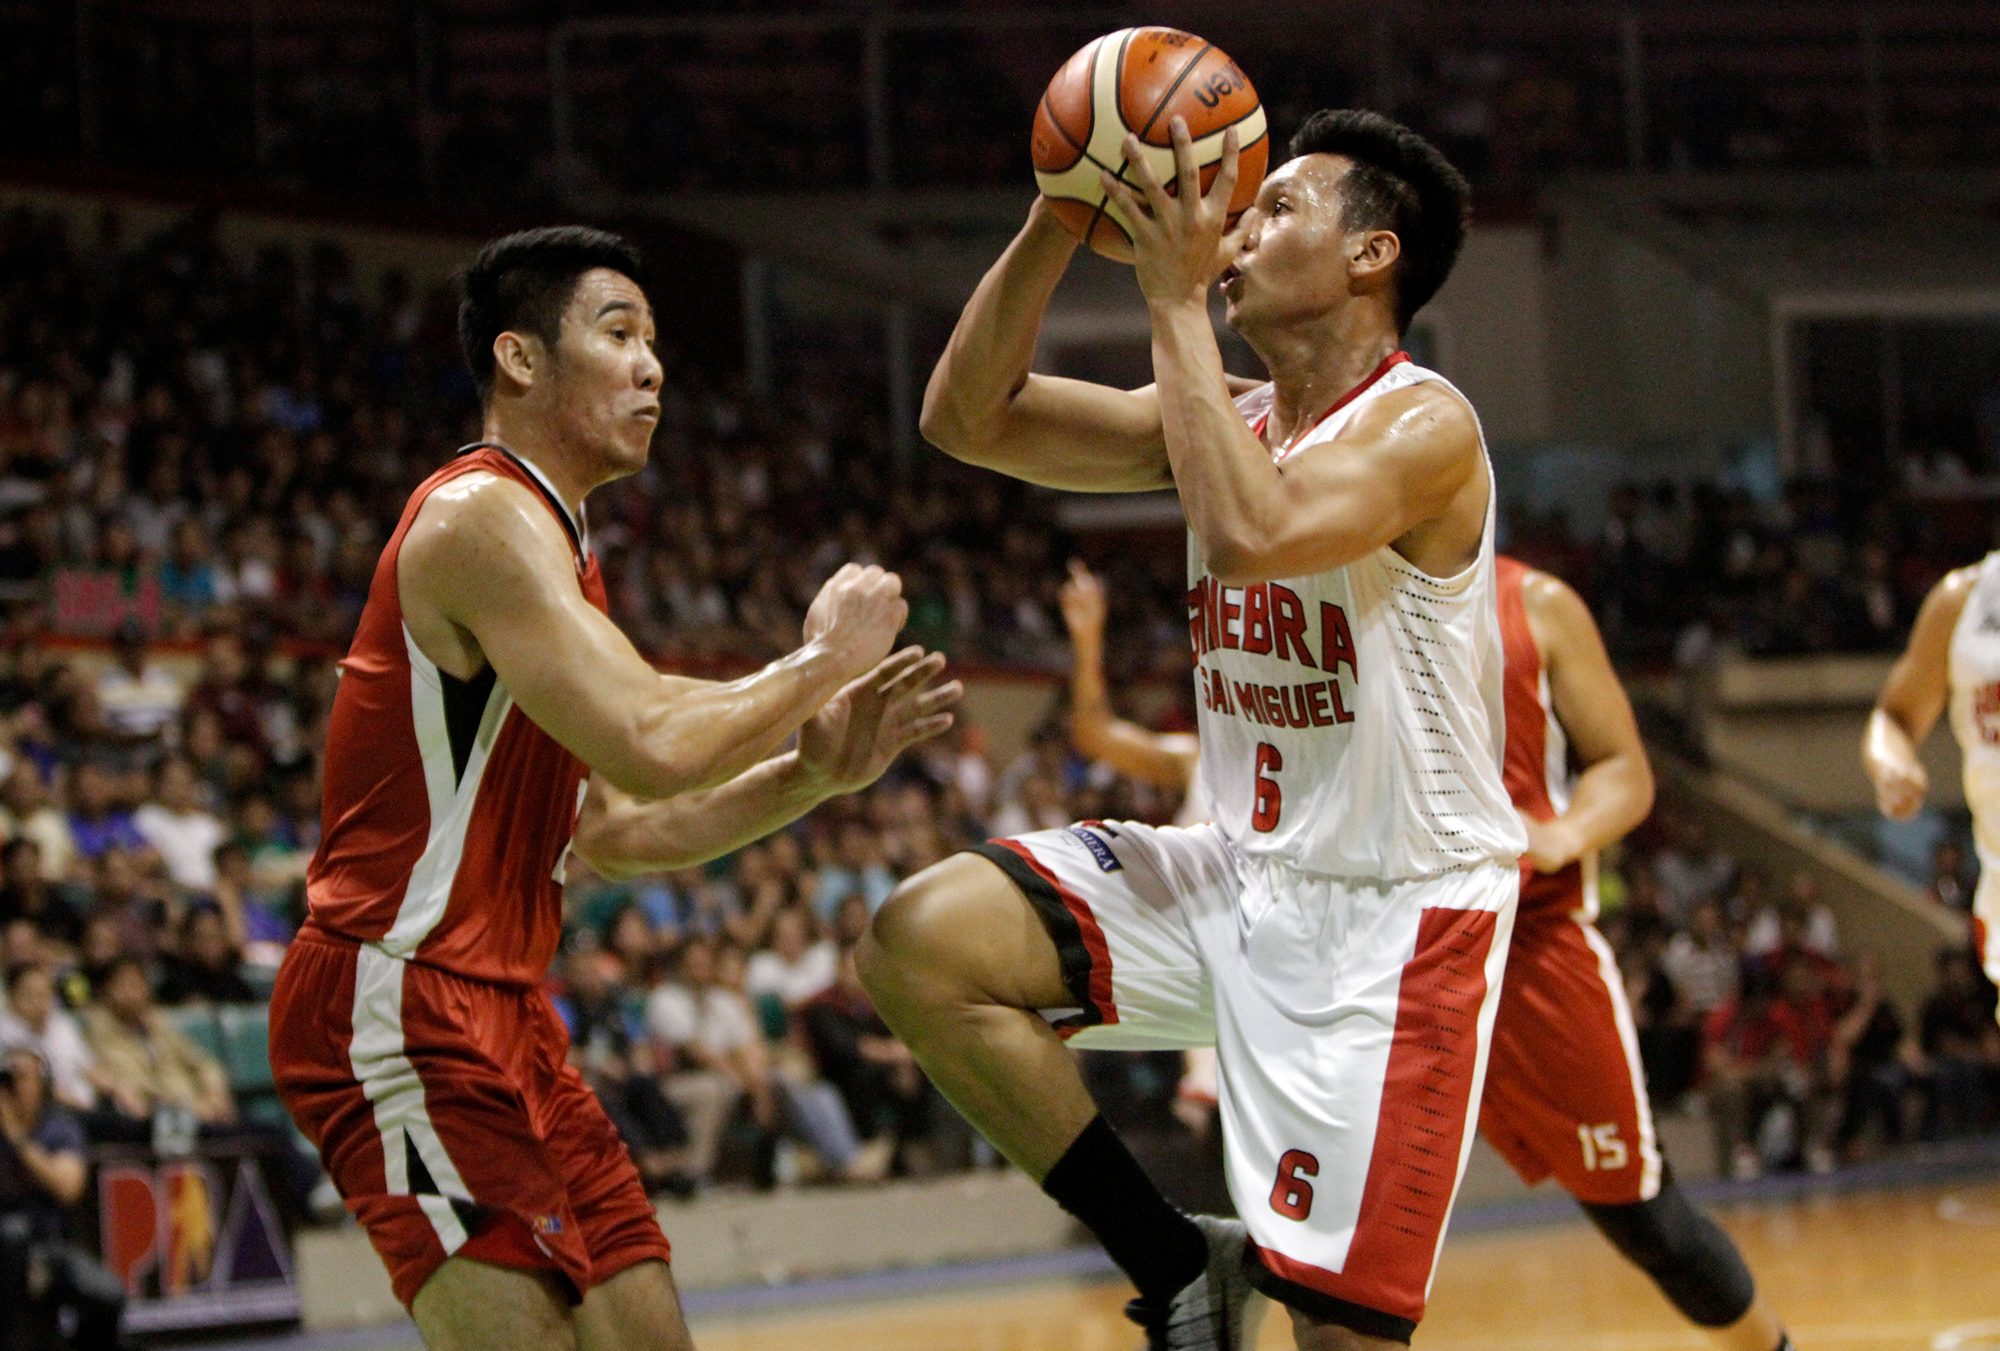 Ginebra outlasts Blackwater, improves to 5-4